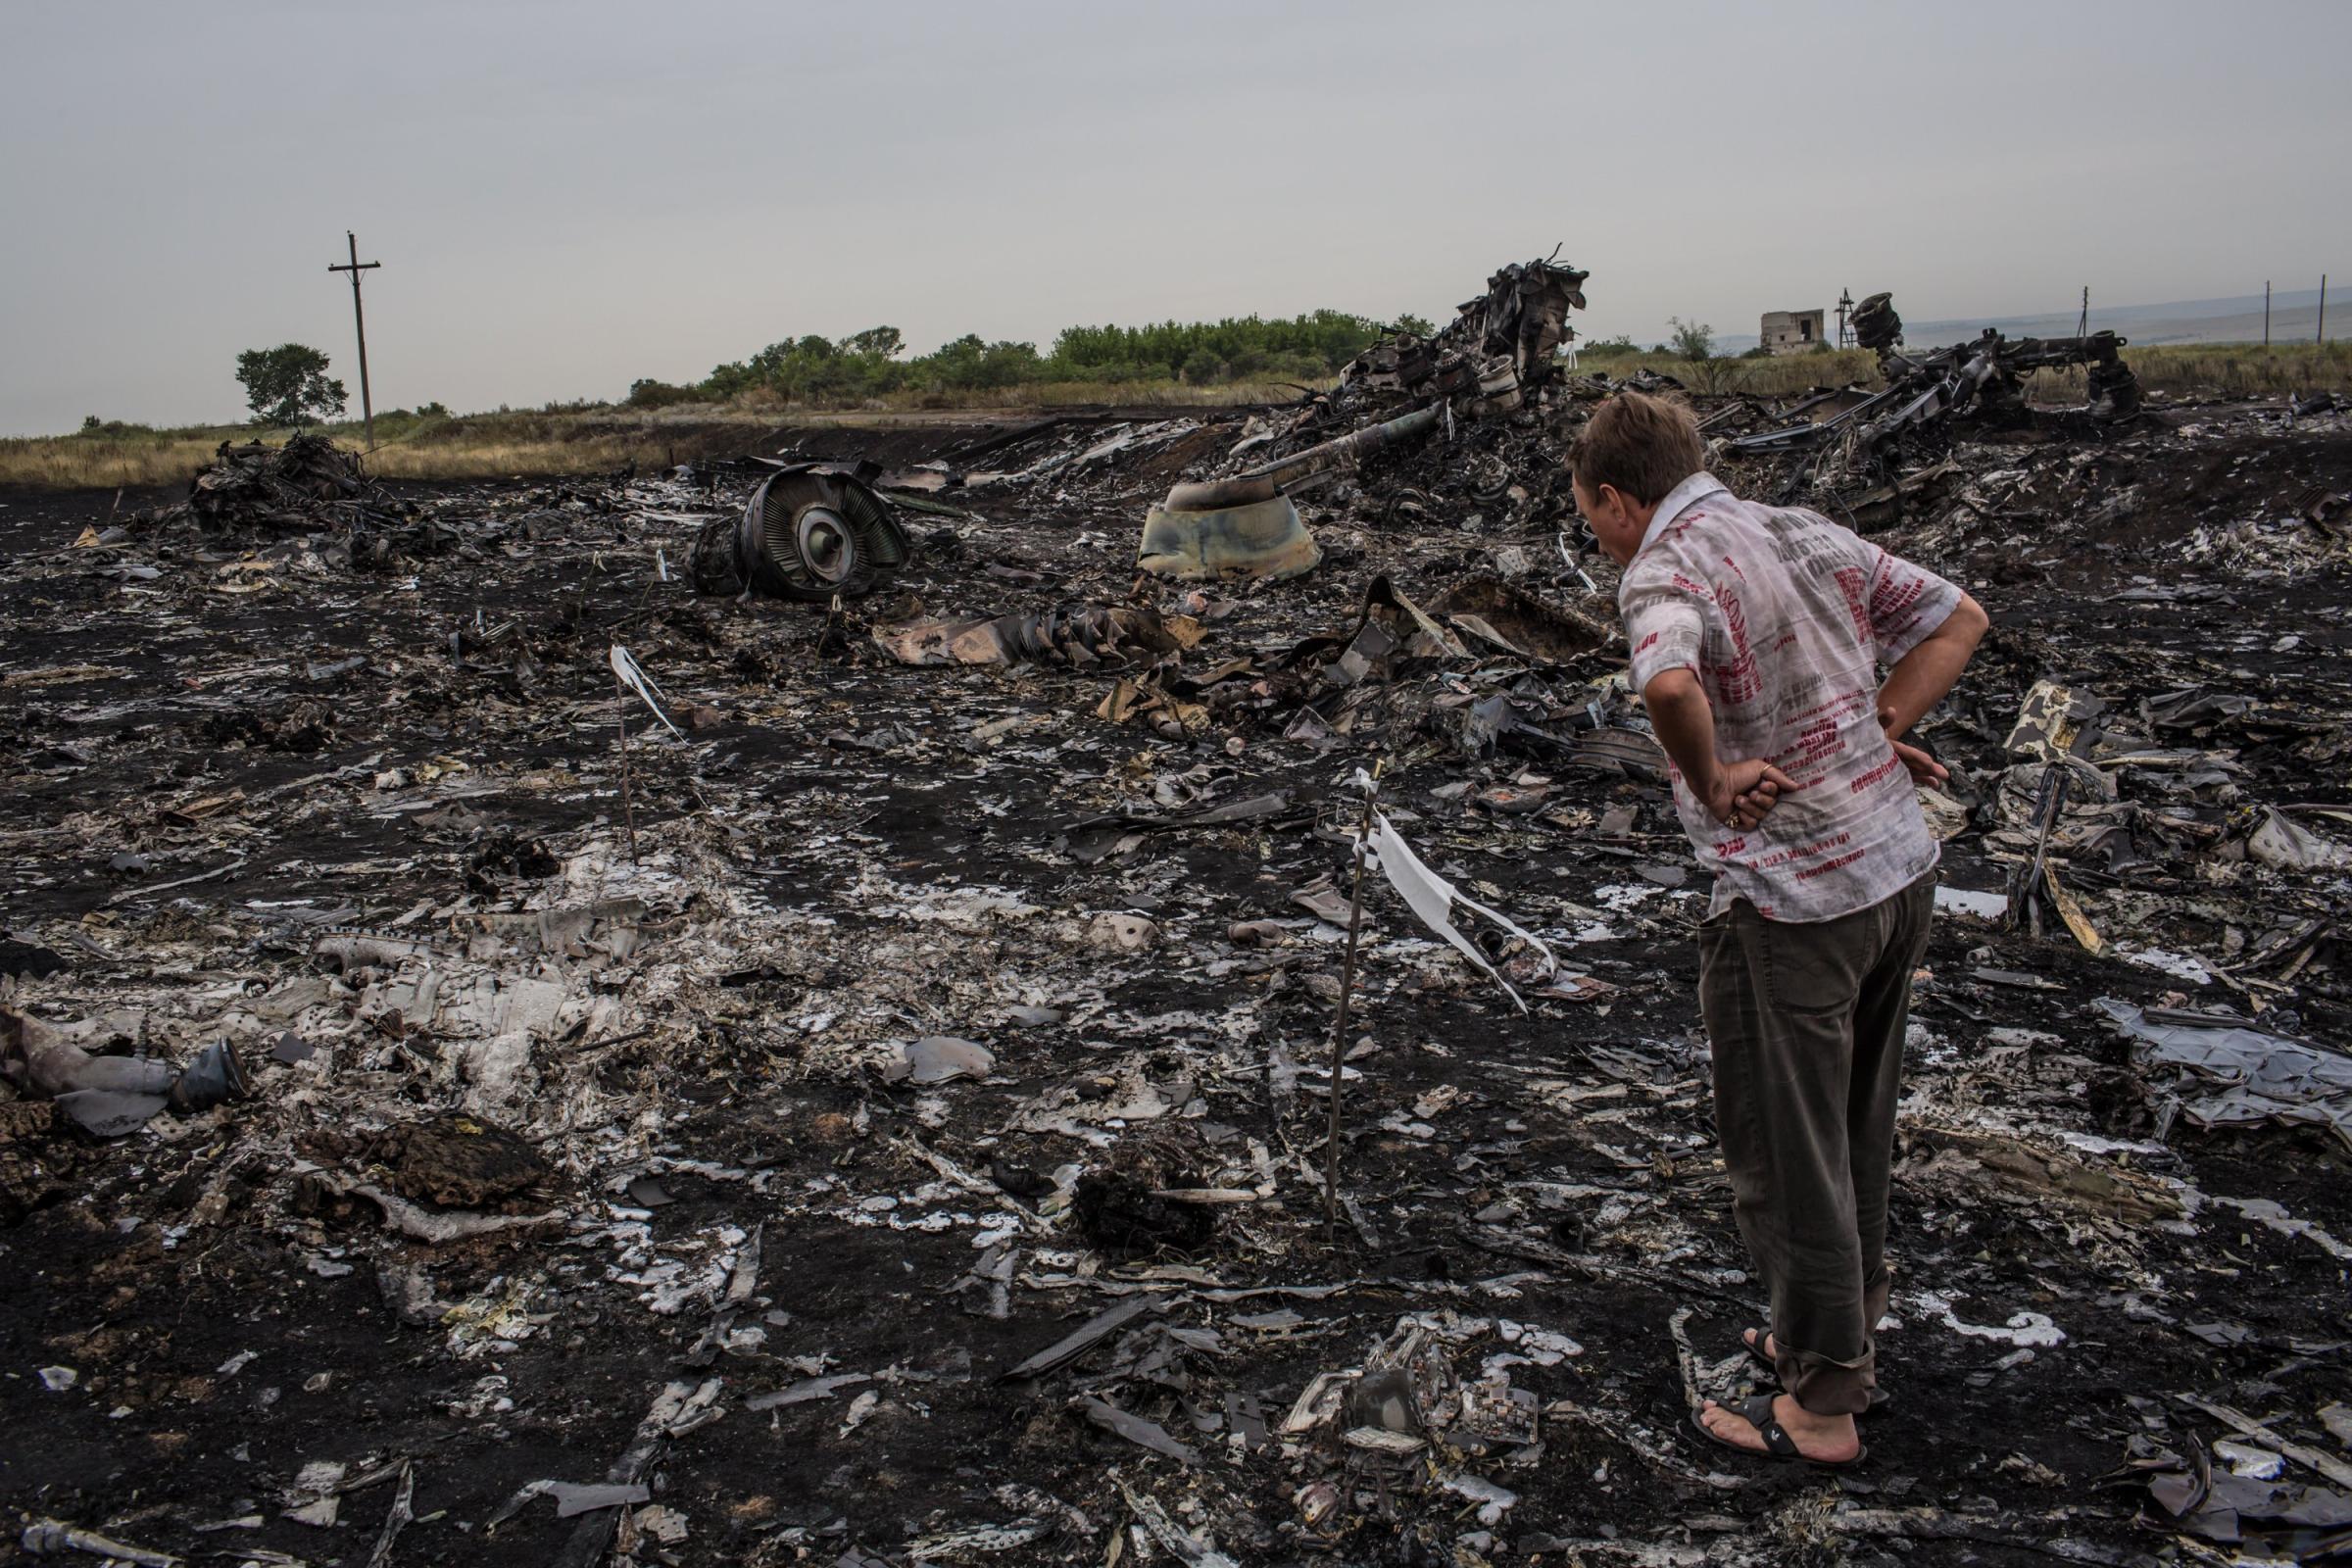 A man looks at debris from an Air Malaysia plane crash on July 18, 2014 in Grabovka, Ukraine.